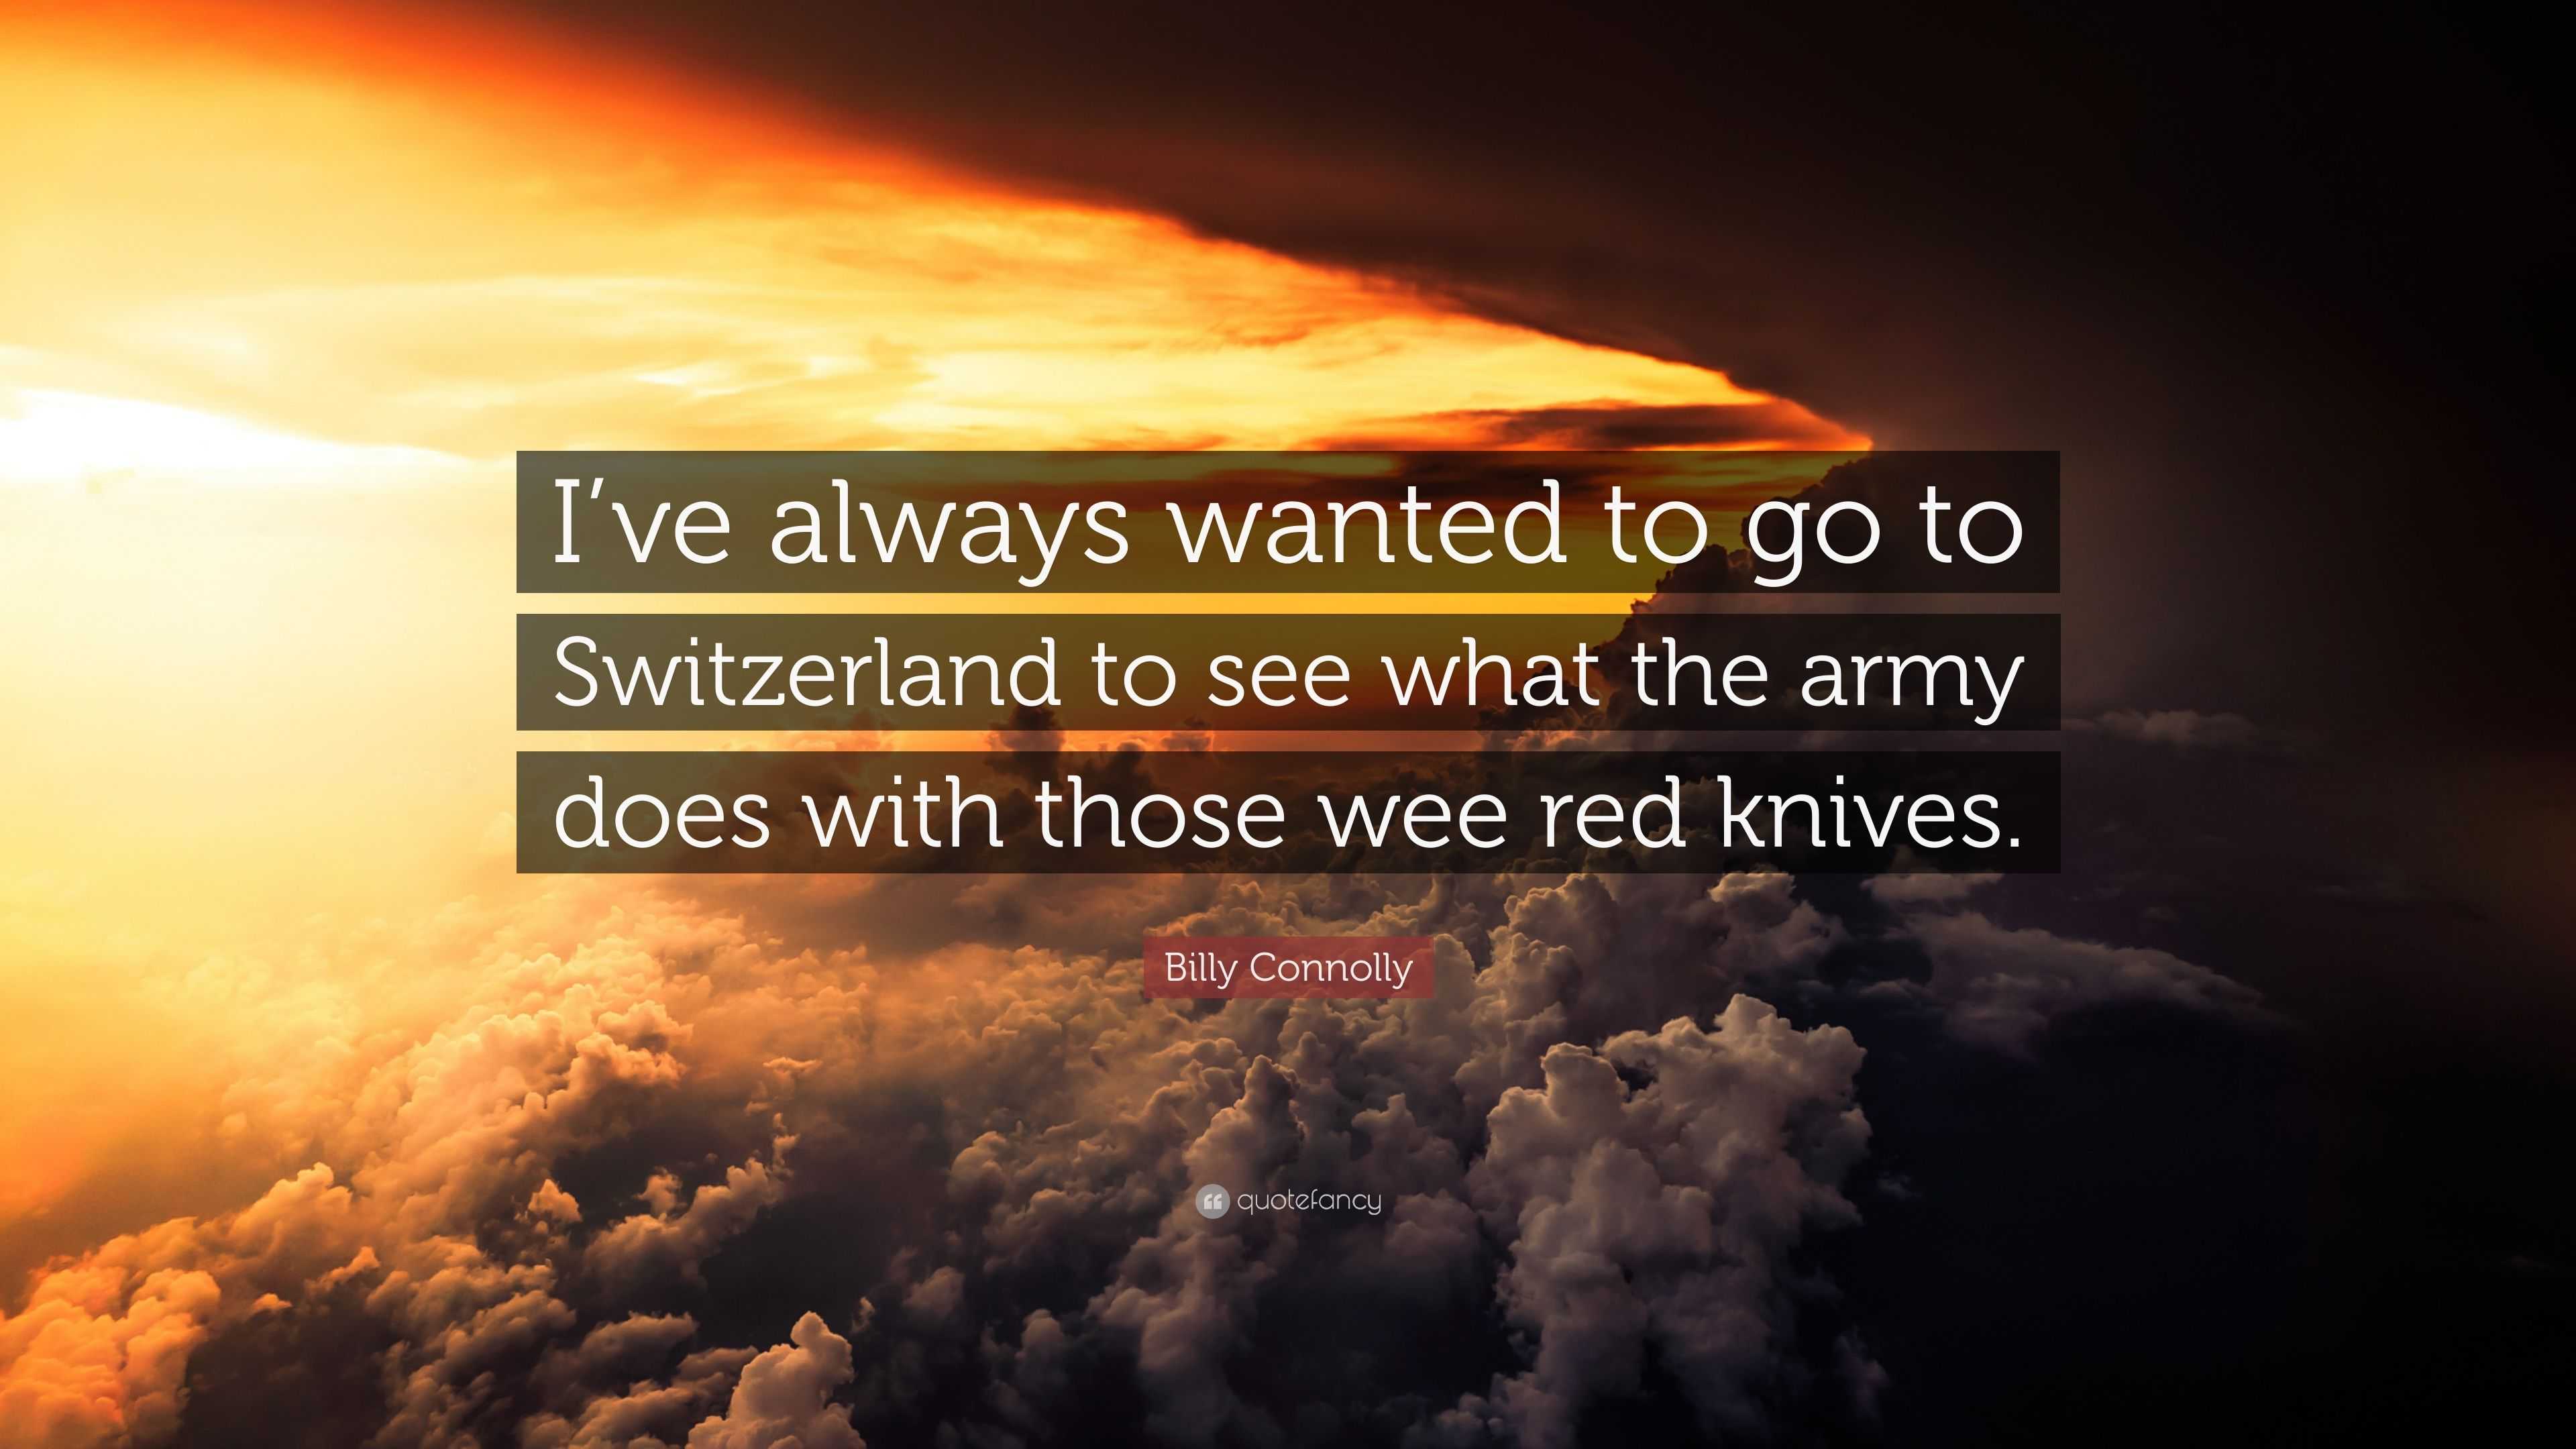 Billy Connolly Quote: “I’ve always wanted to go to Switzerland to see ...